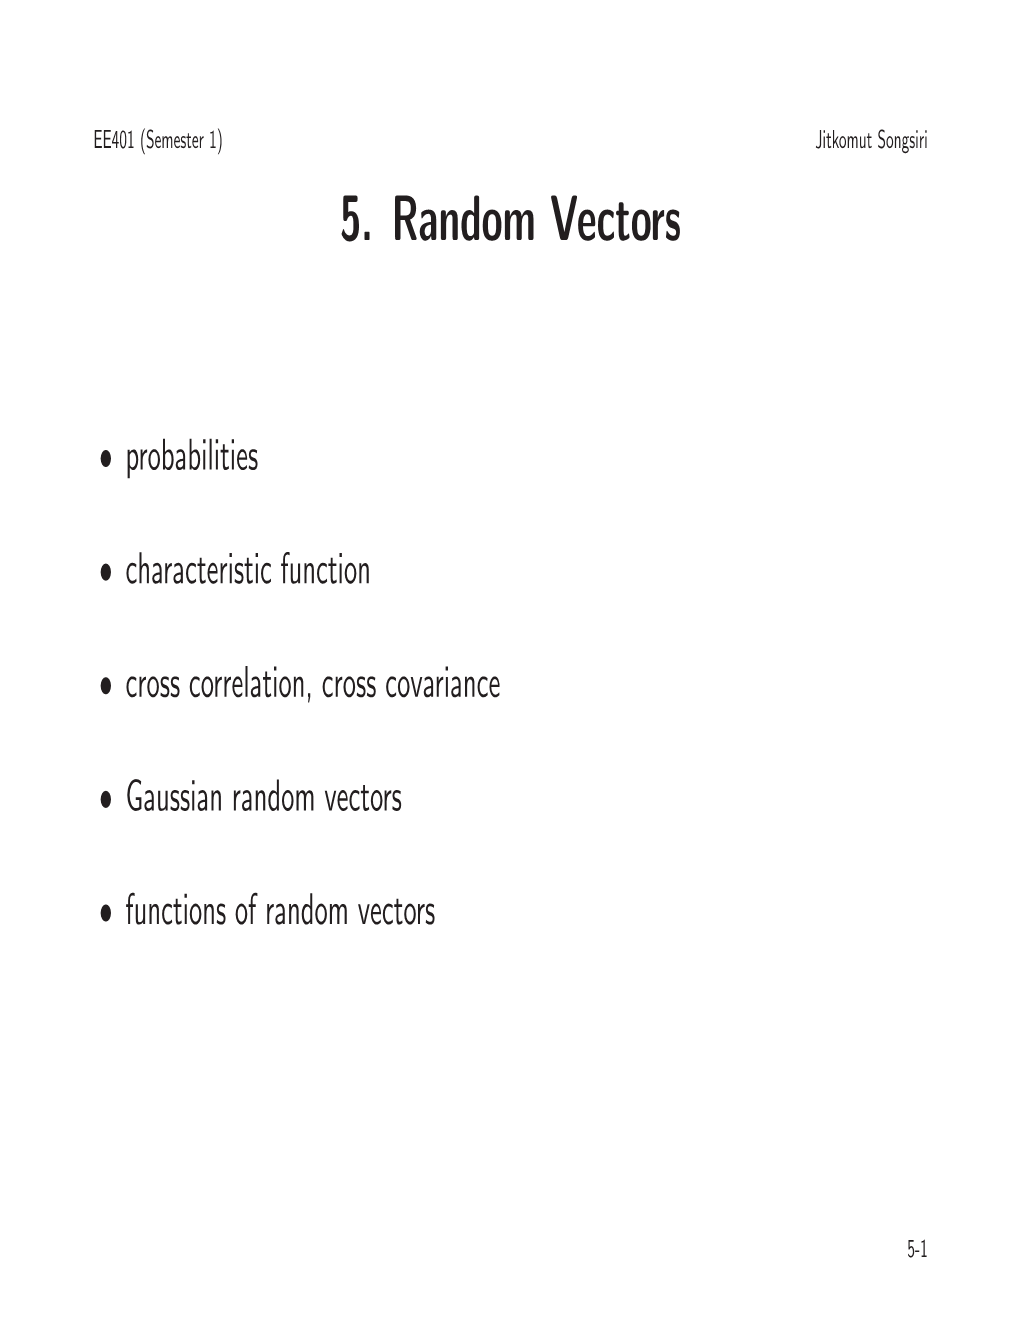 Vector Random Variables with Means Μx,Μy Respectively